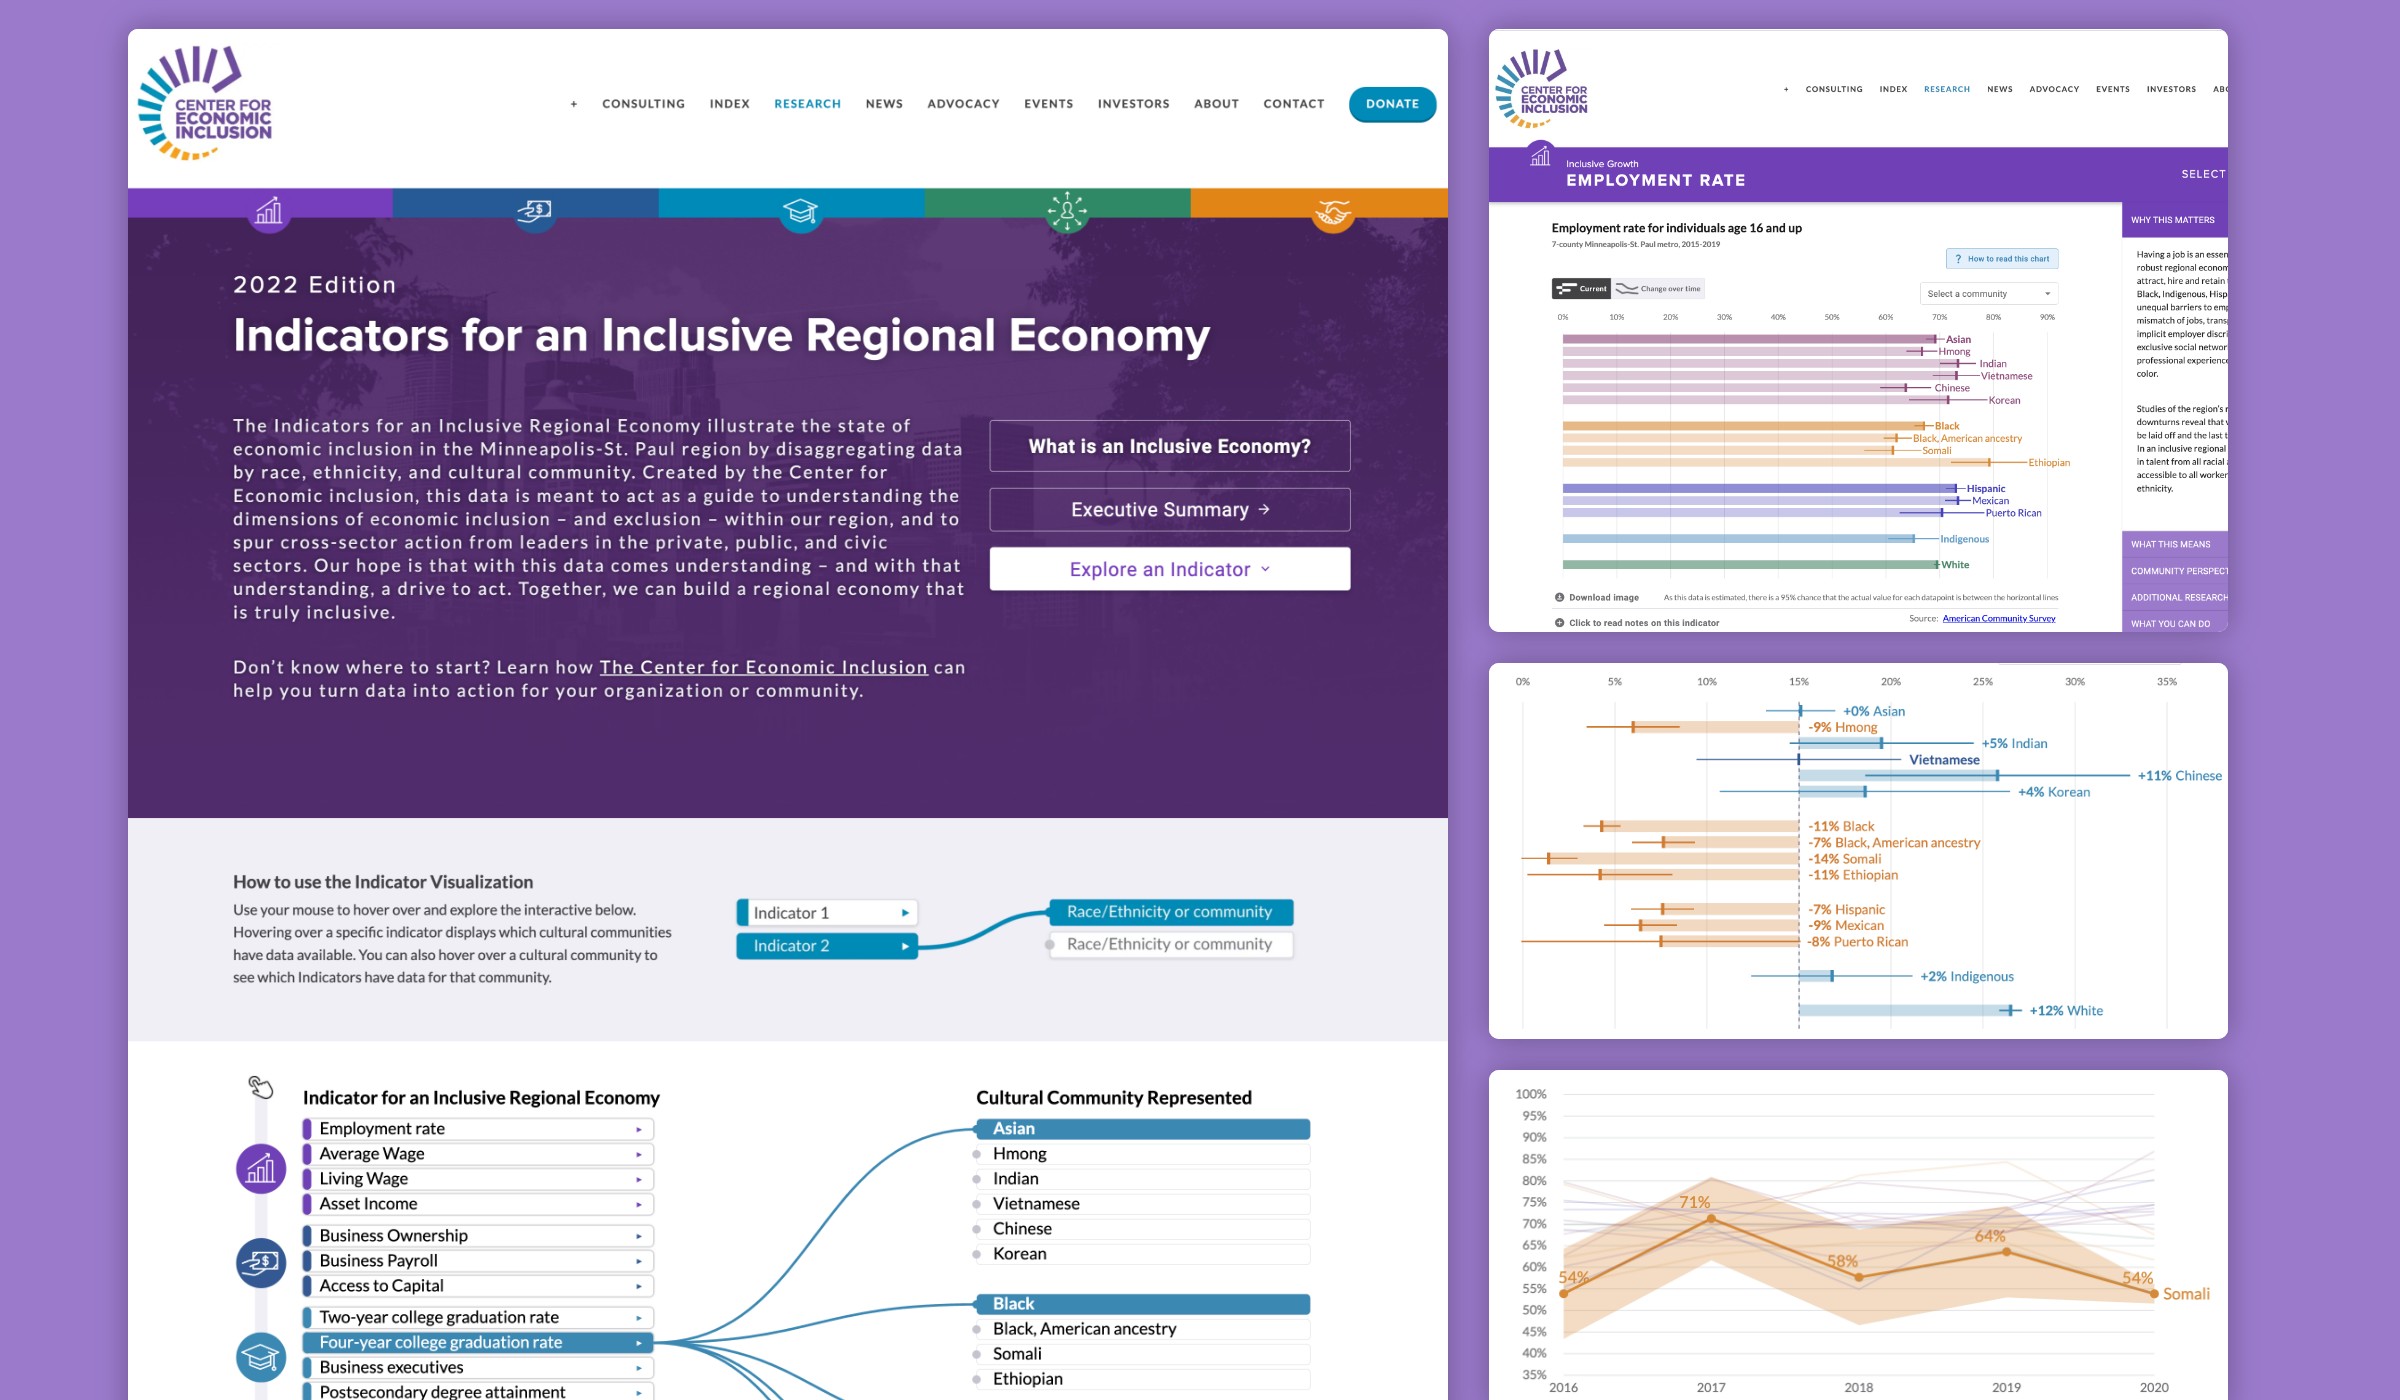 A collection of images from the Indicators for an Inclusive Regional Economy website